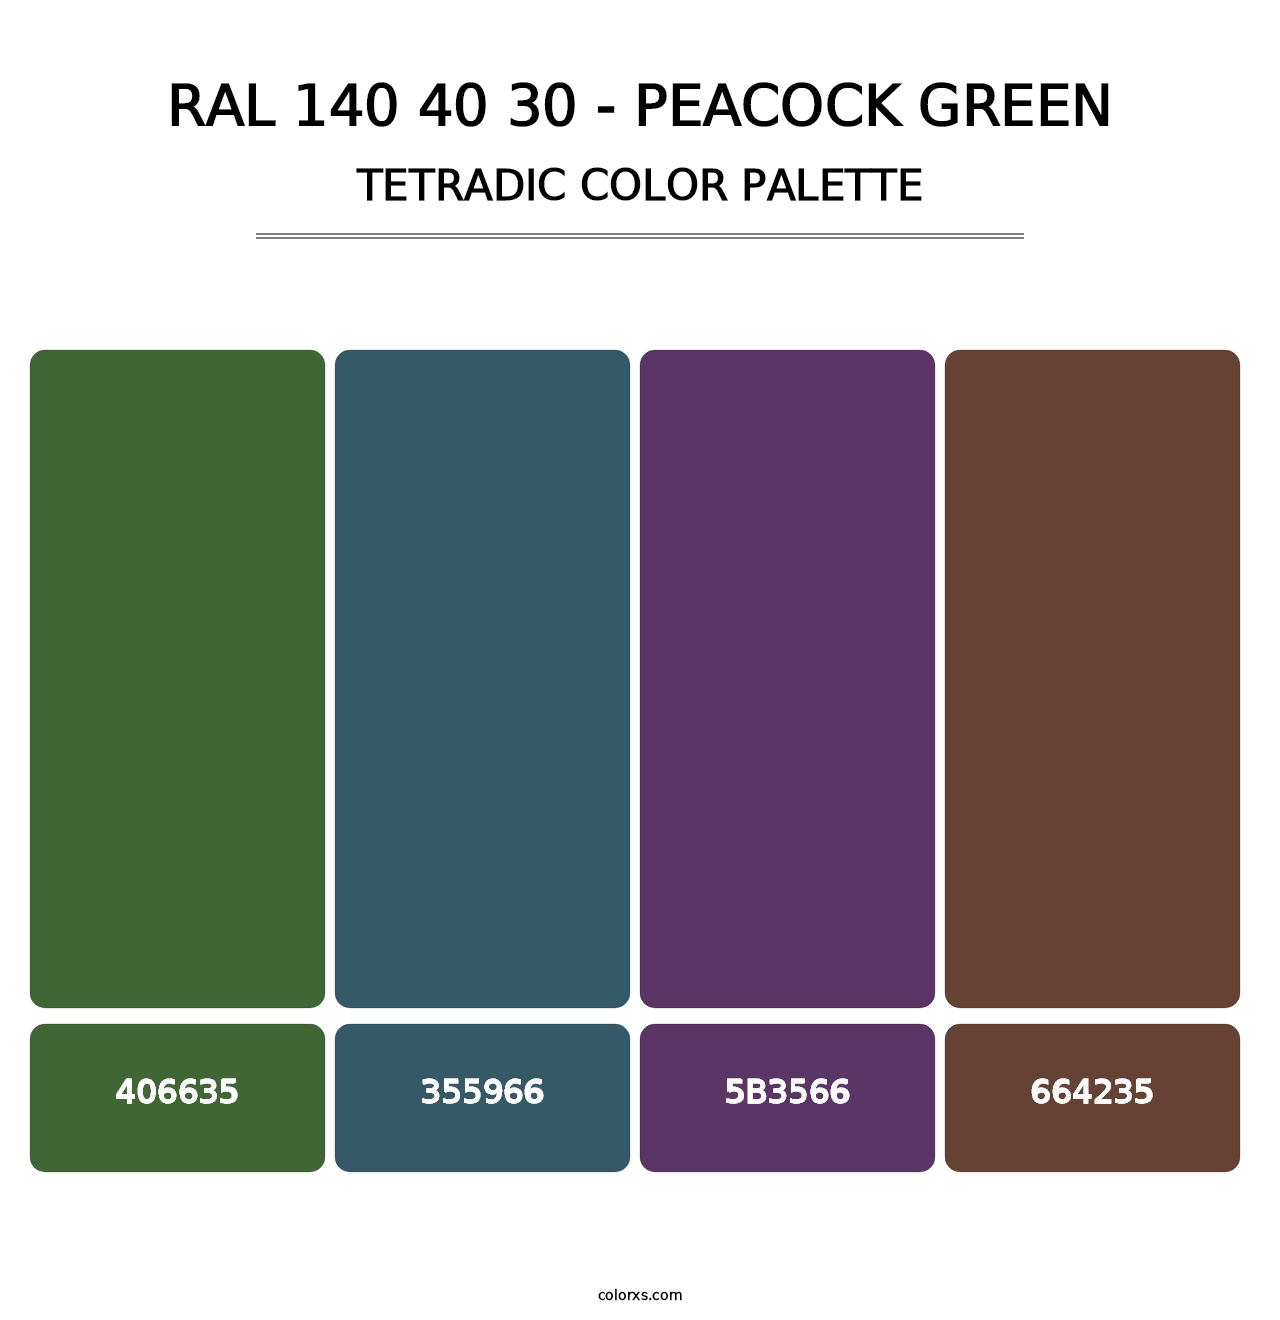 RAL 140 40 30 - Peacock Green - Tetradic Color Palette